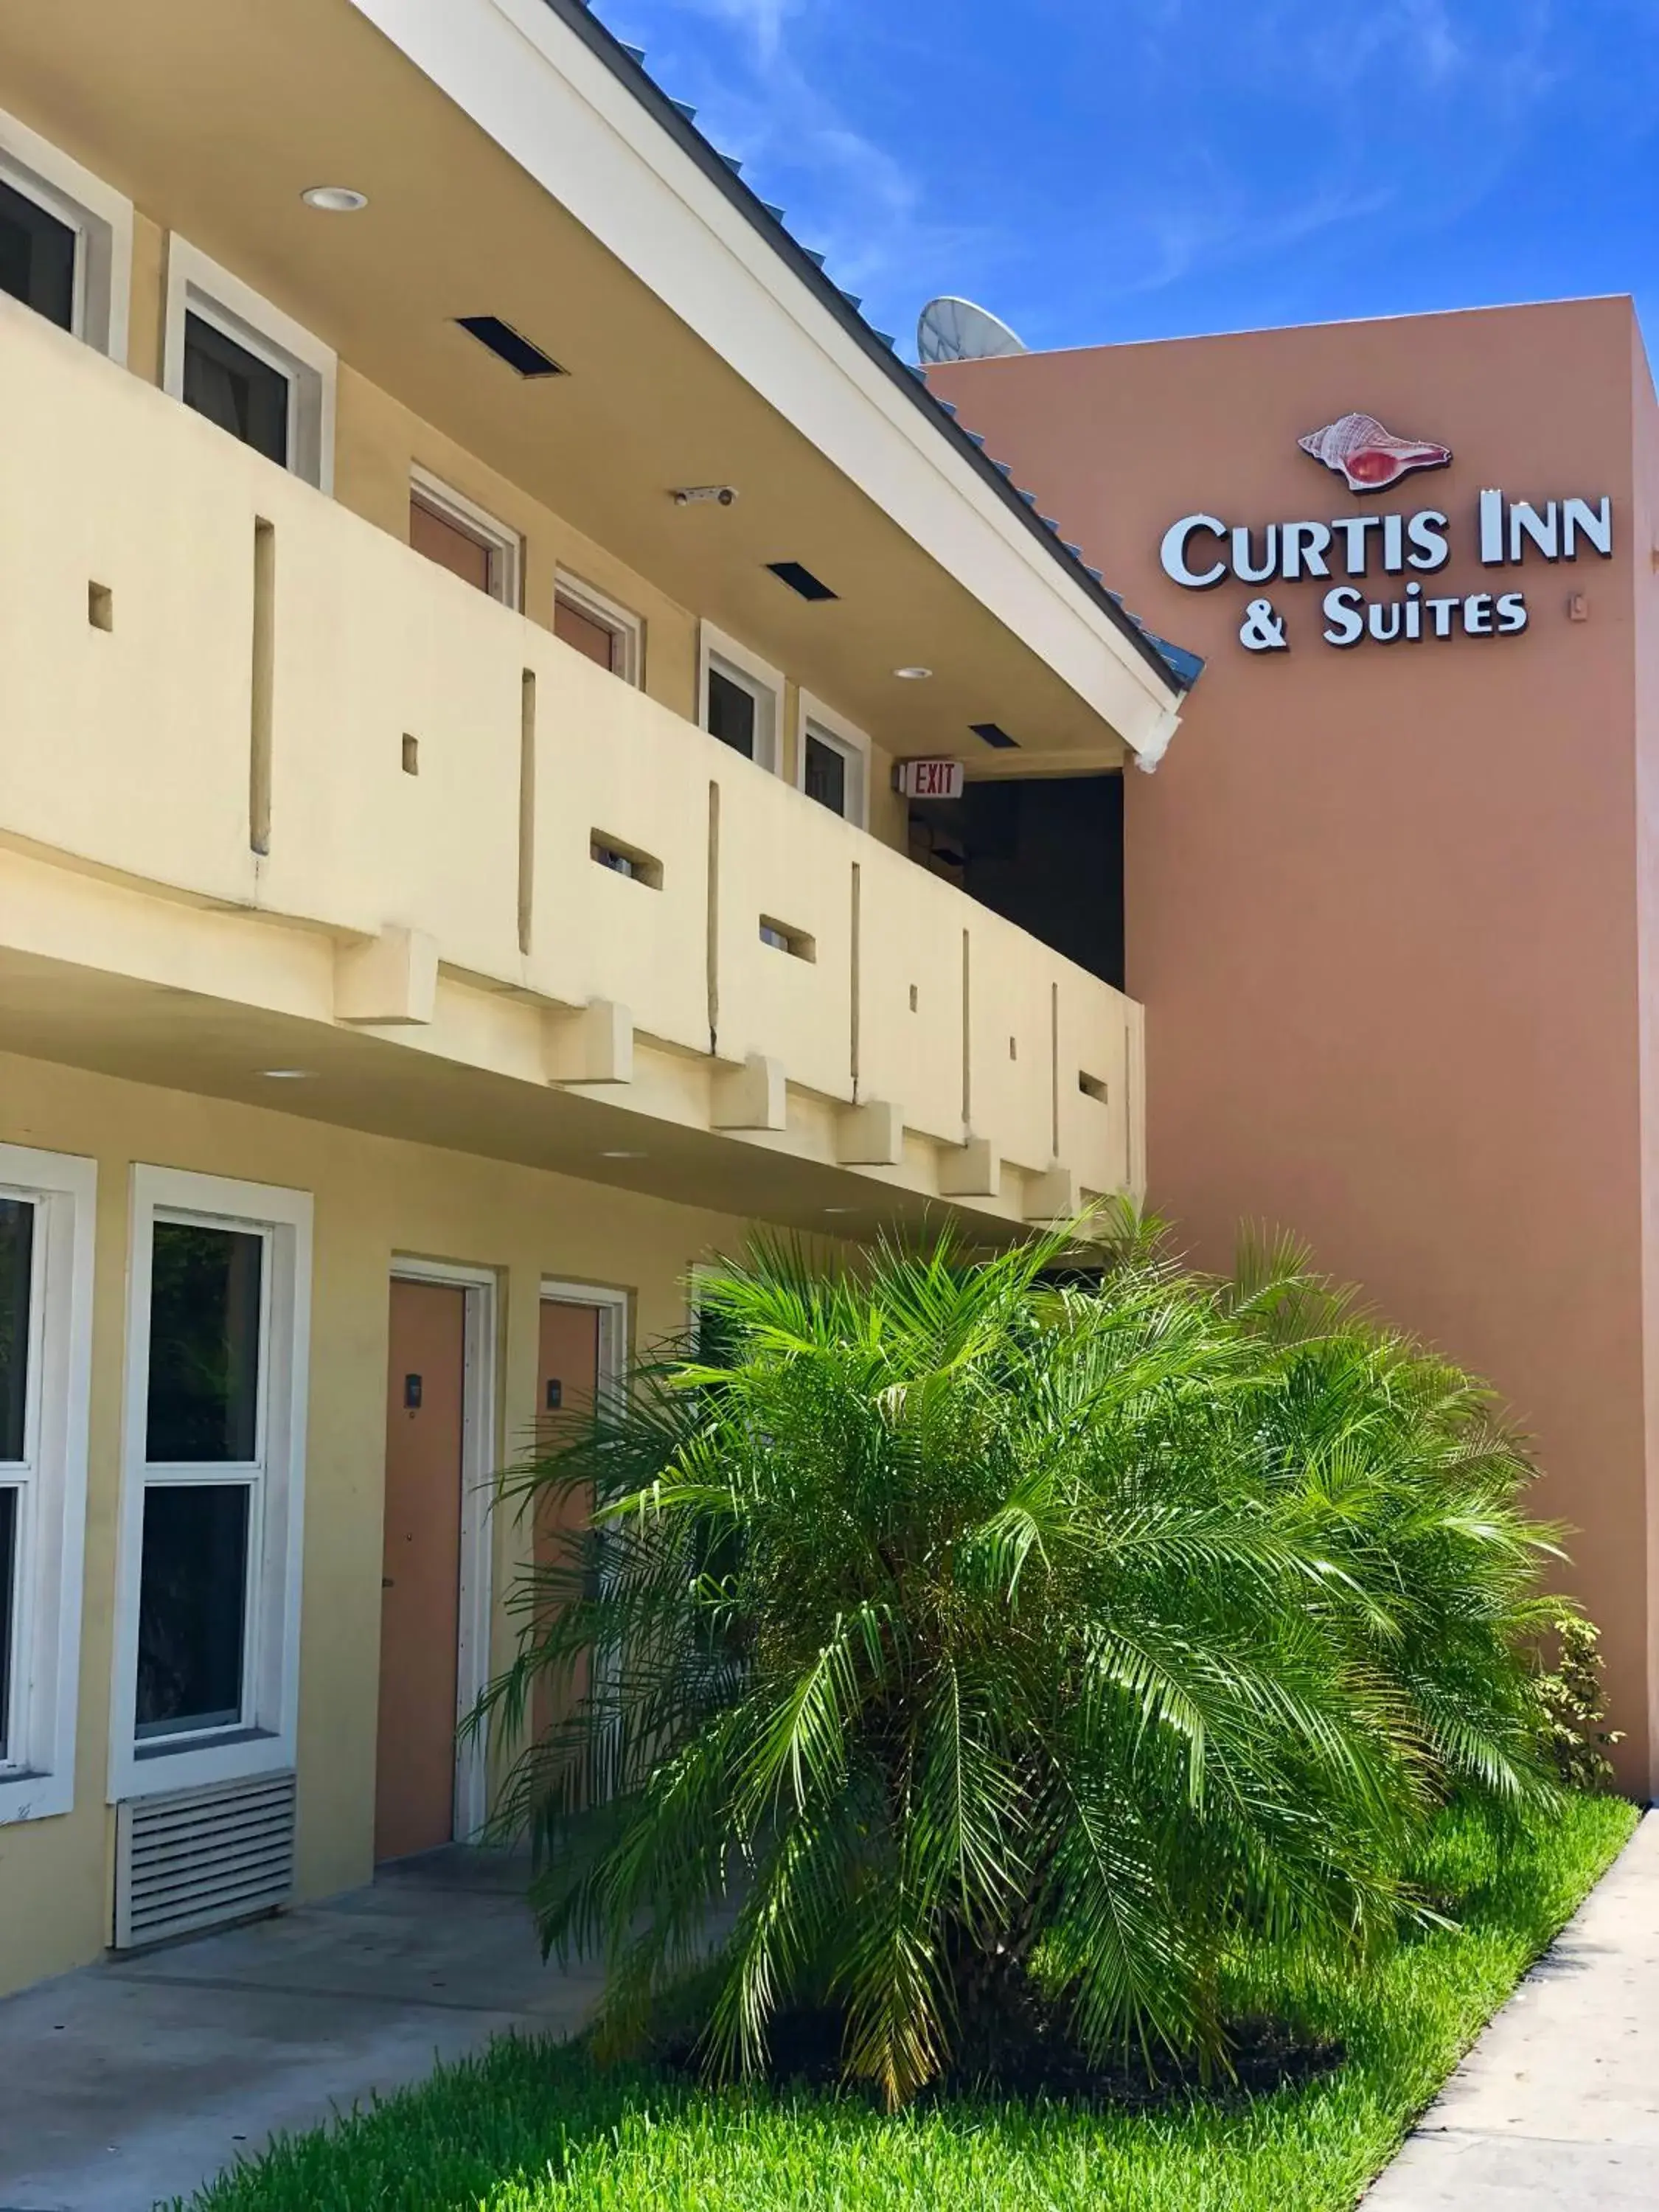 Property Building in Curtis Inn & Suites